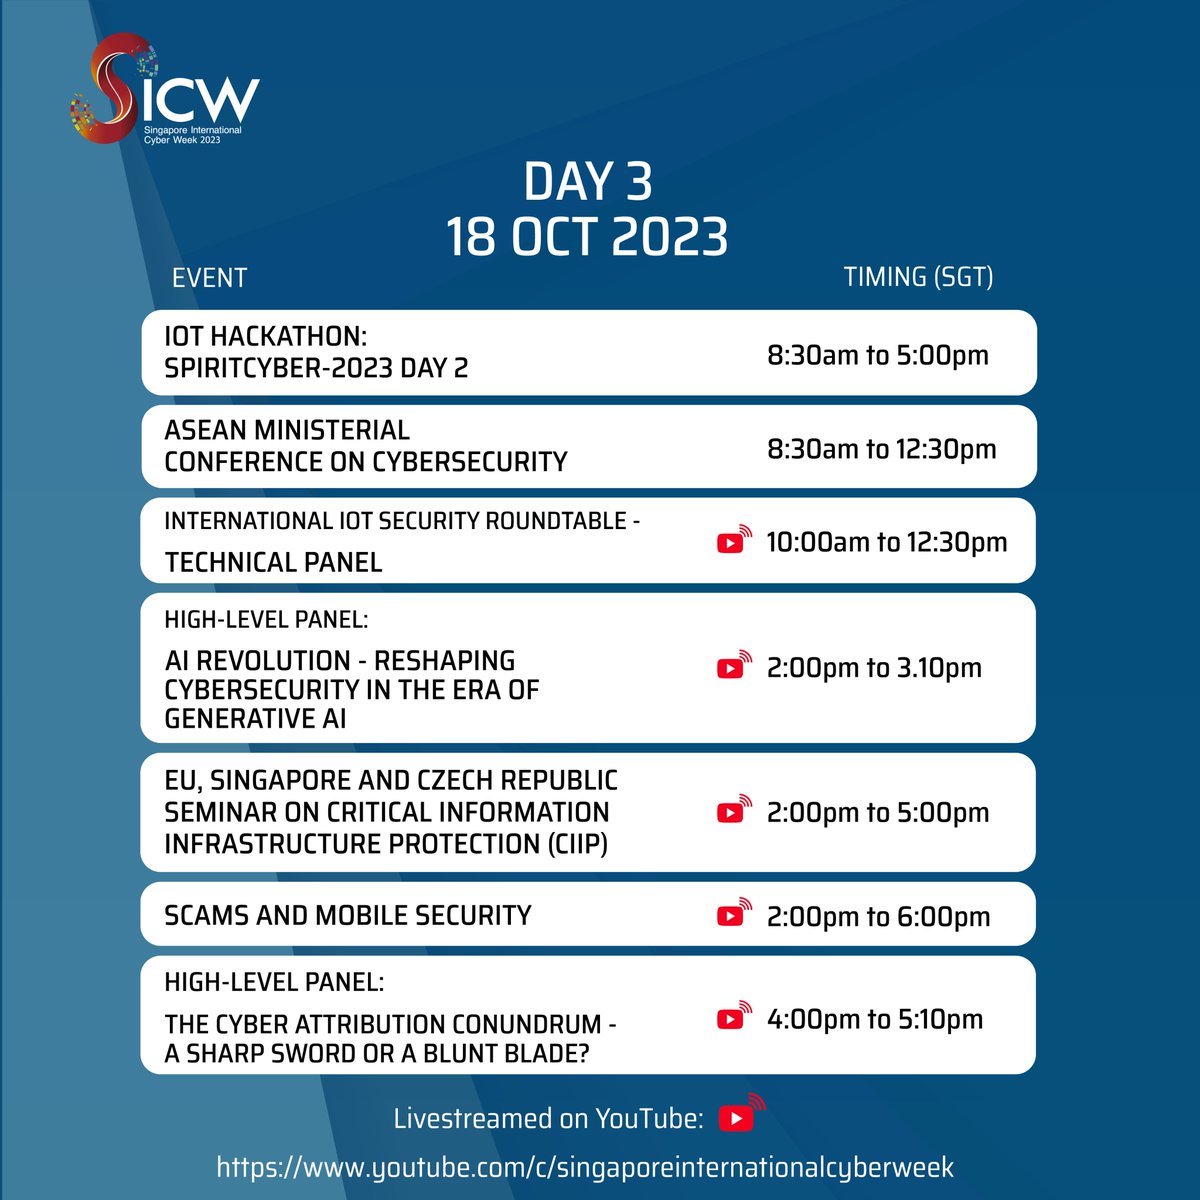 Check out this preview of what you can expect on the third day of #SICW2023!